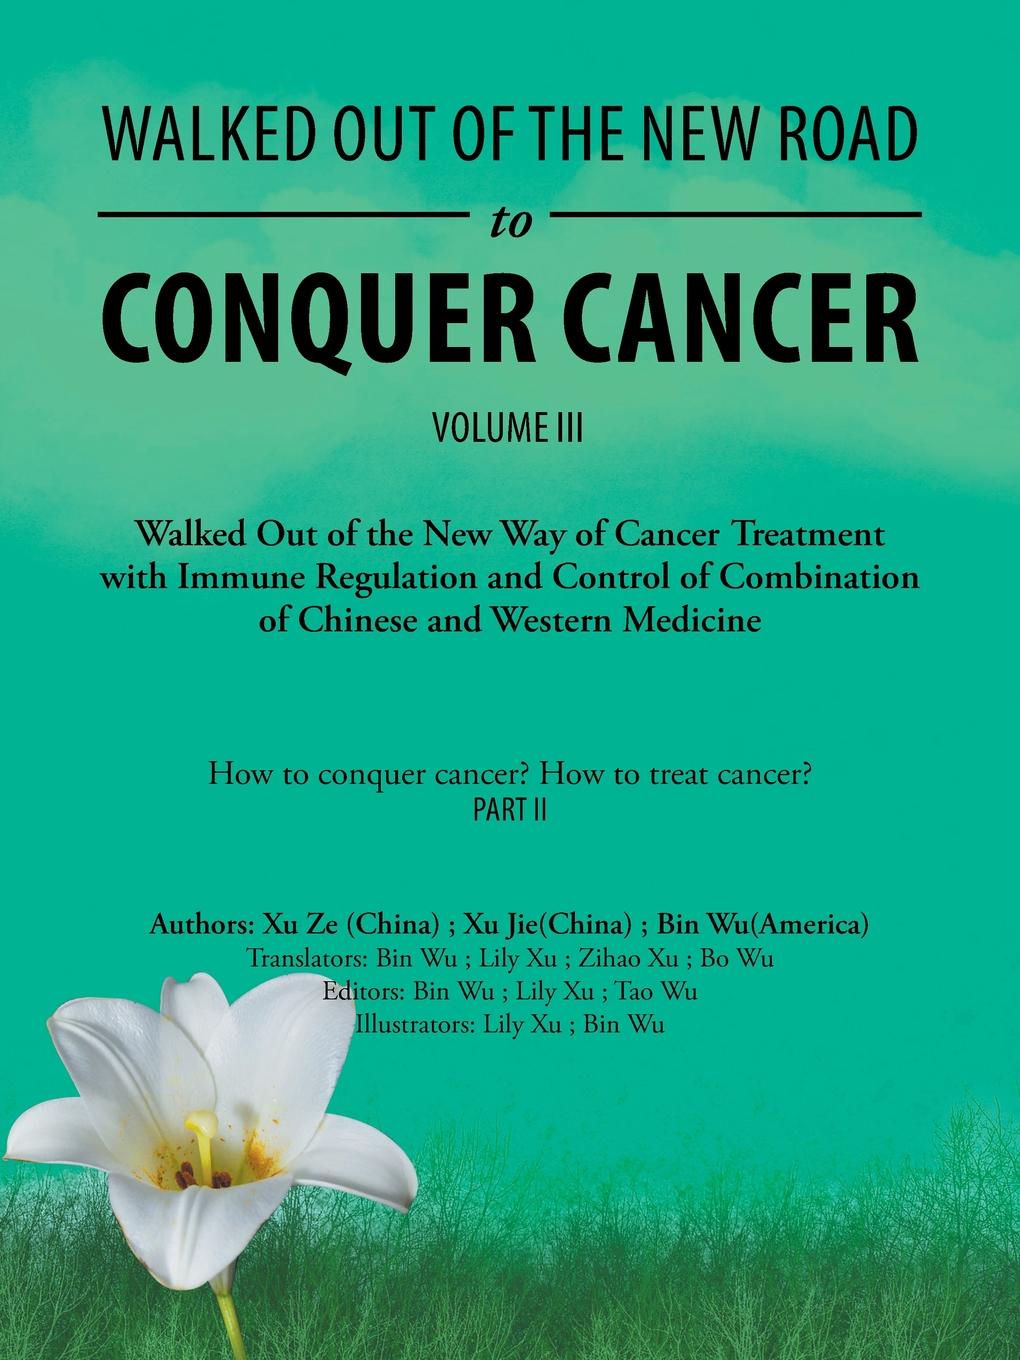 Walked out of the New Road to Conquer Cancer. Walked out of the New Way of Cancer Treatment with Immune Regulation and Control of the Combination of Chinese and Western Medicine